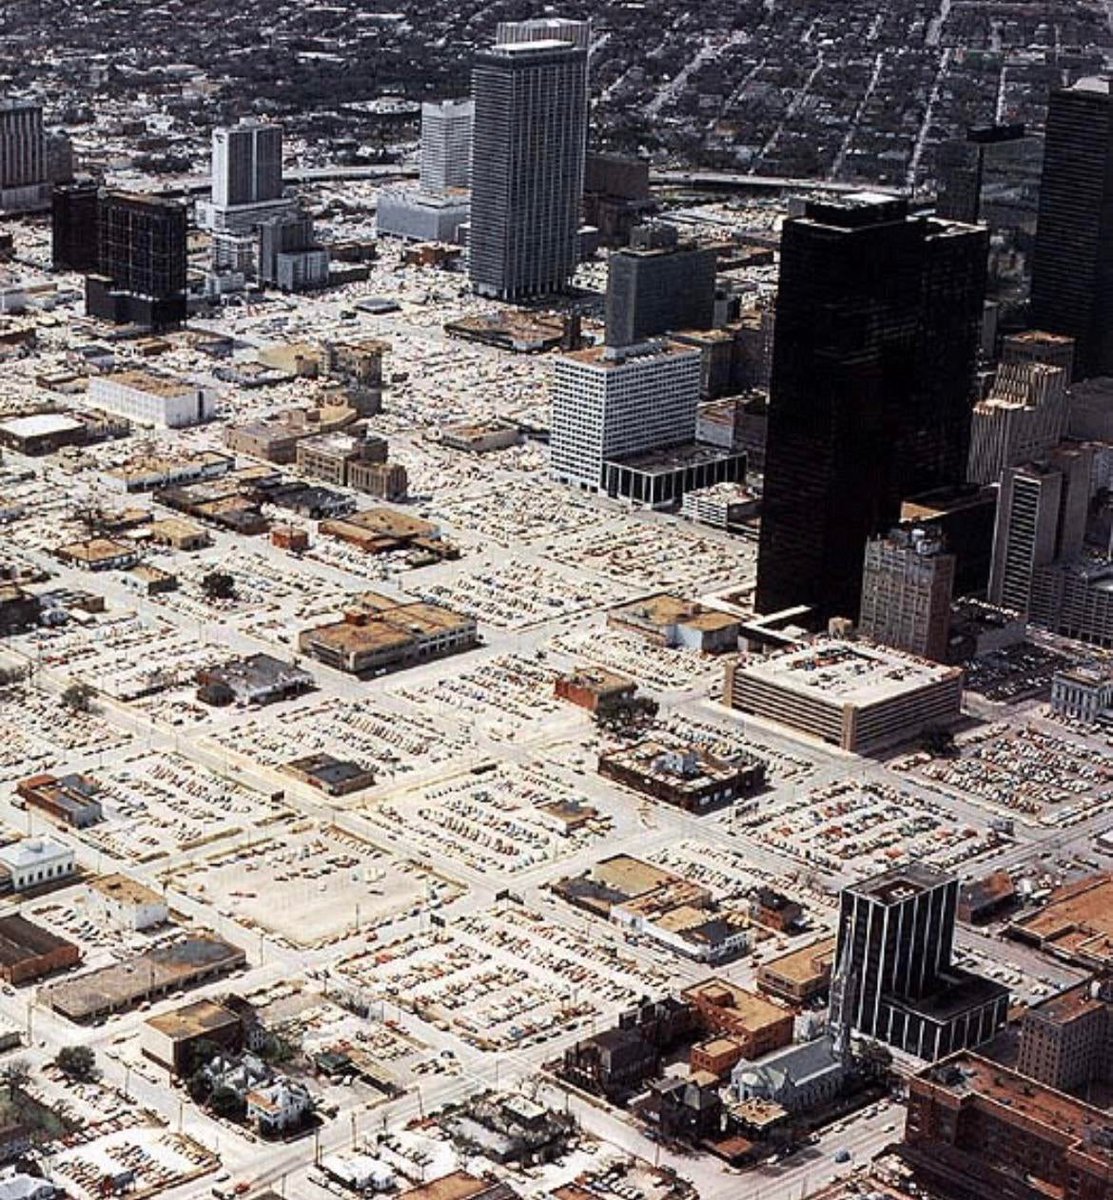 Idk if y'all have seen this photo before... but it's genuinely wild that Downtown Houston used to be a literal parking lot in the 70s.